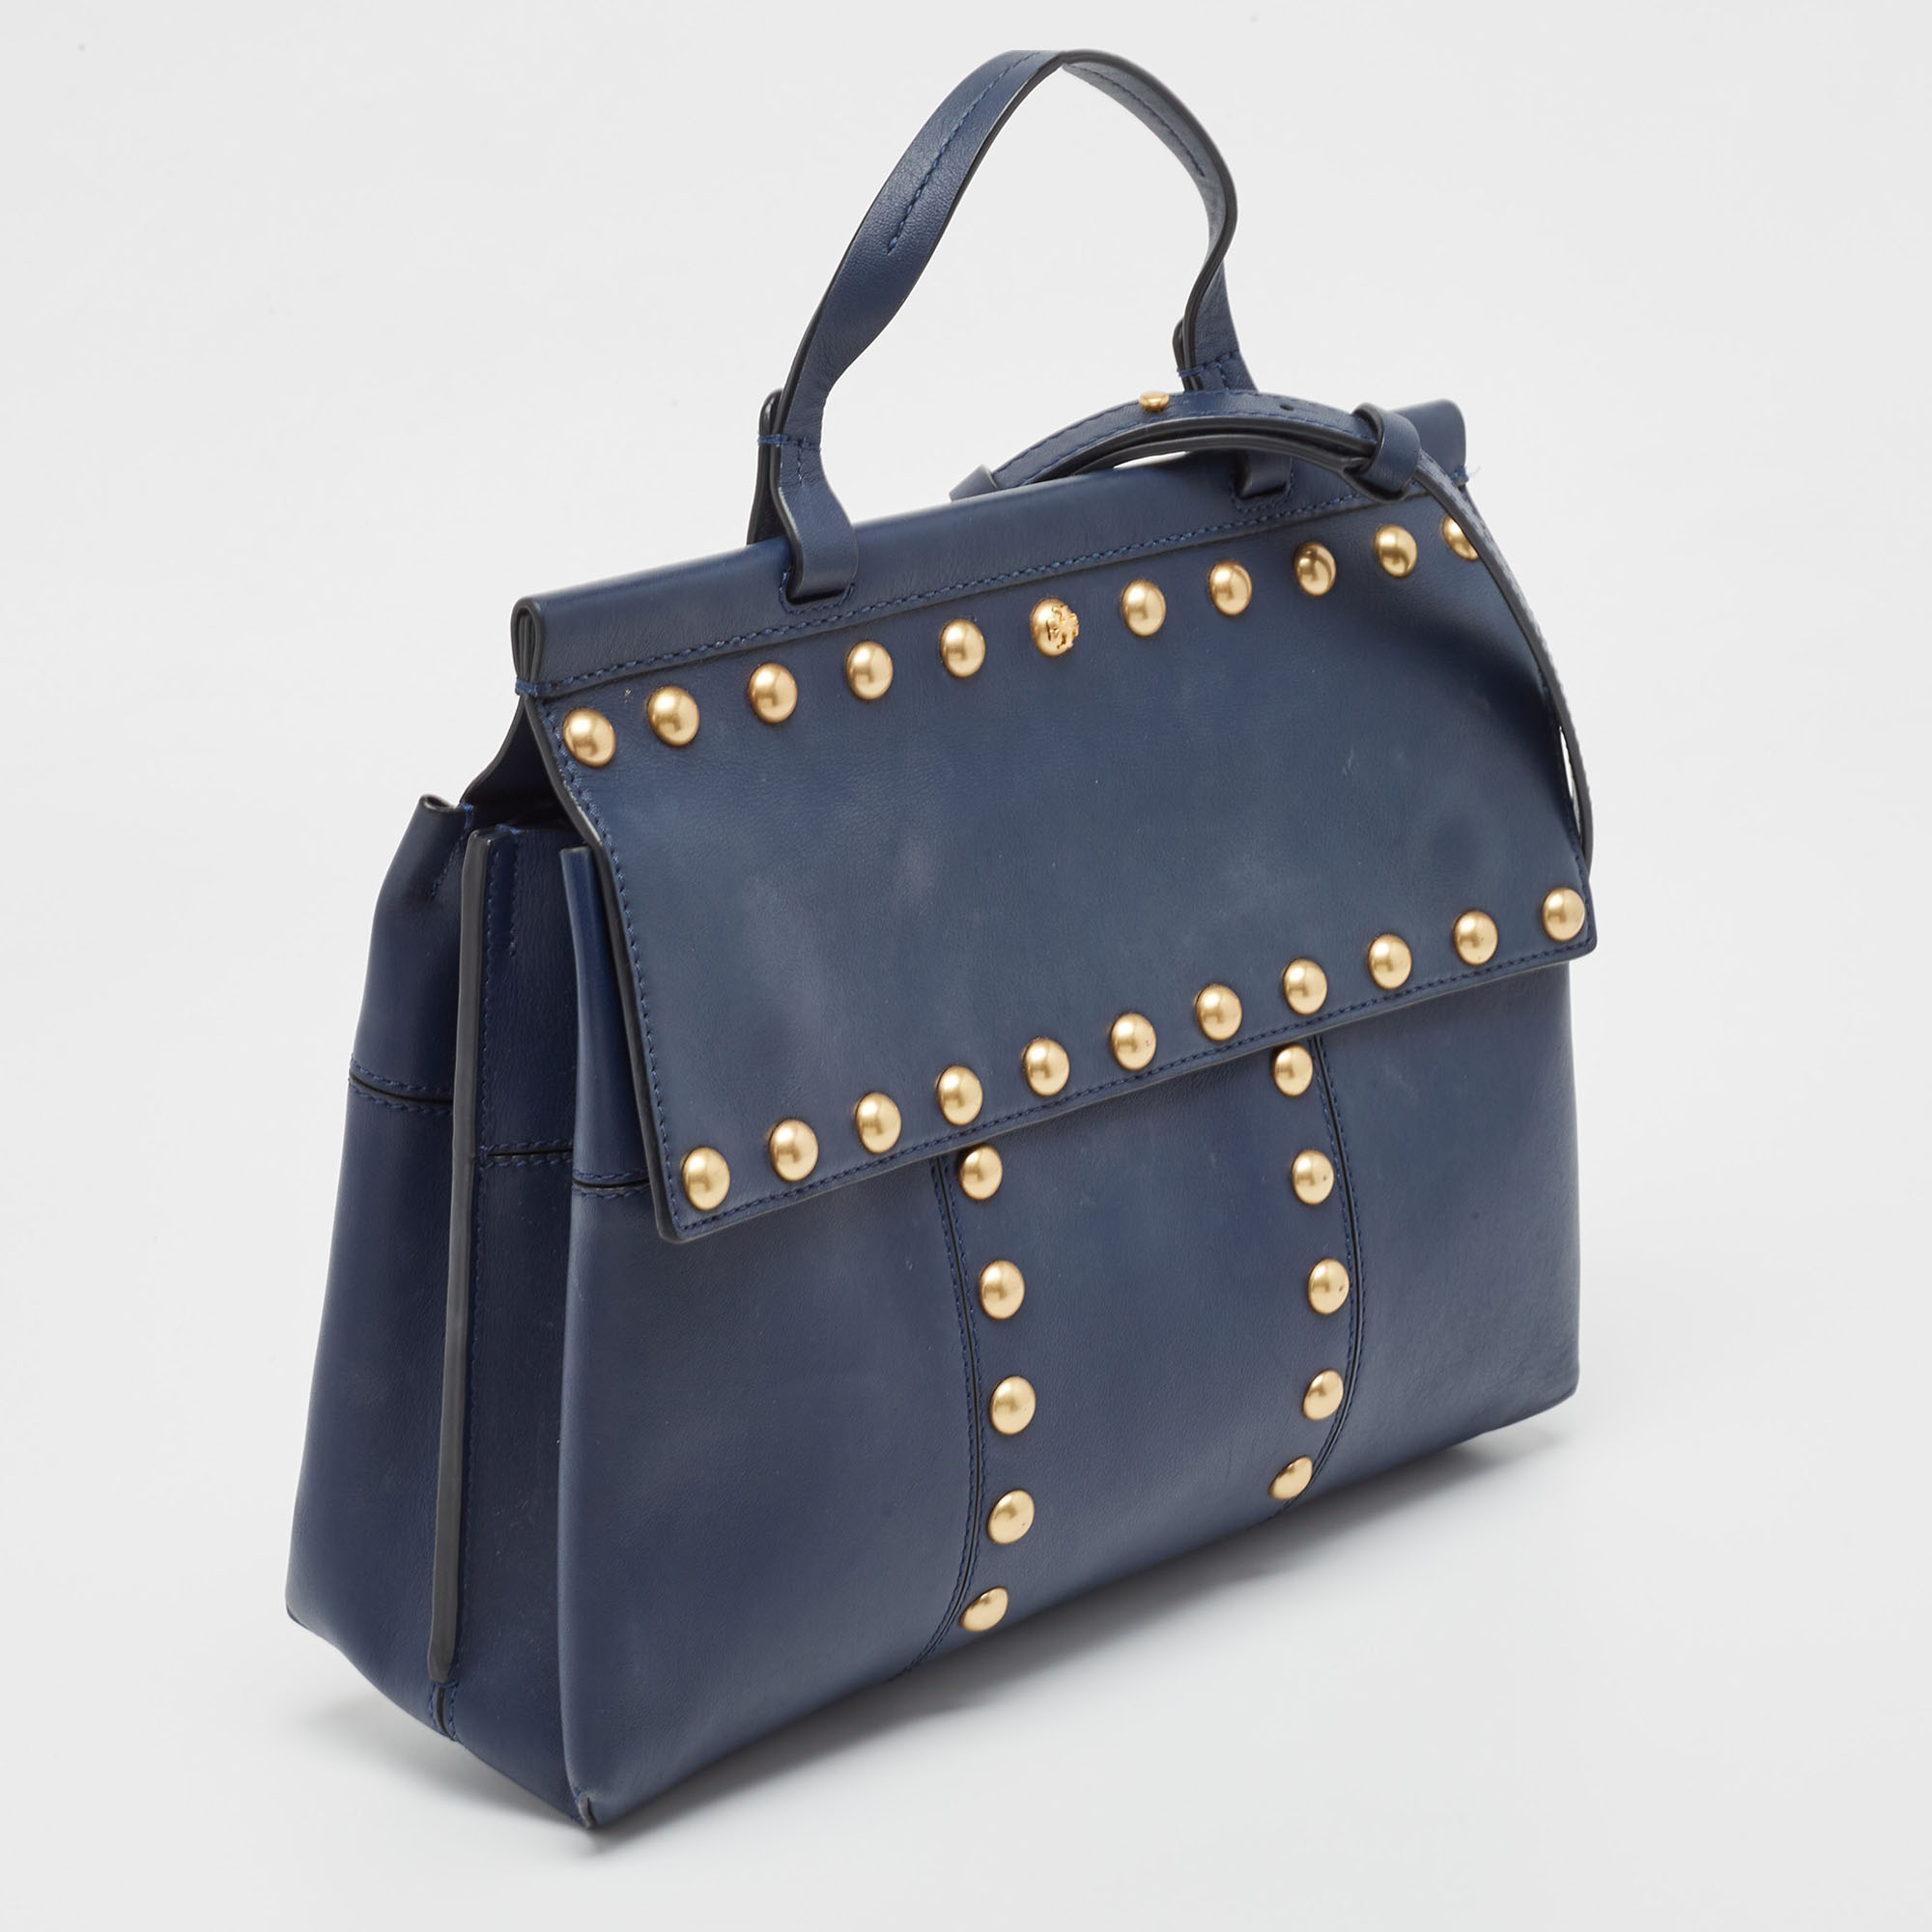 Tory Burch Navy Blue Leather Block-T Studded Top Handle Bag